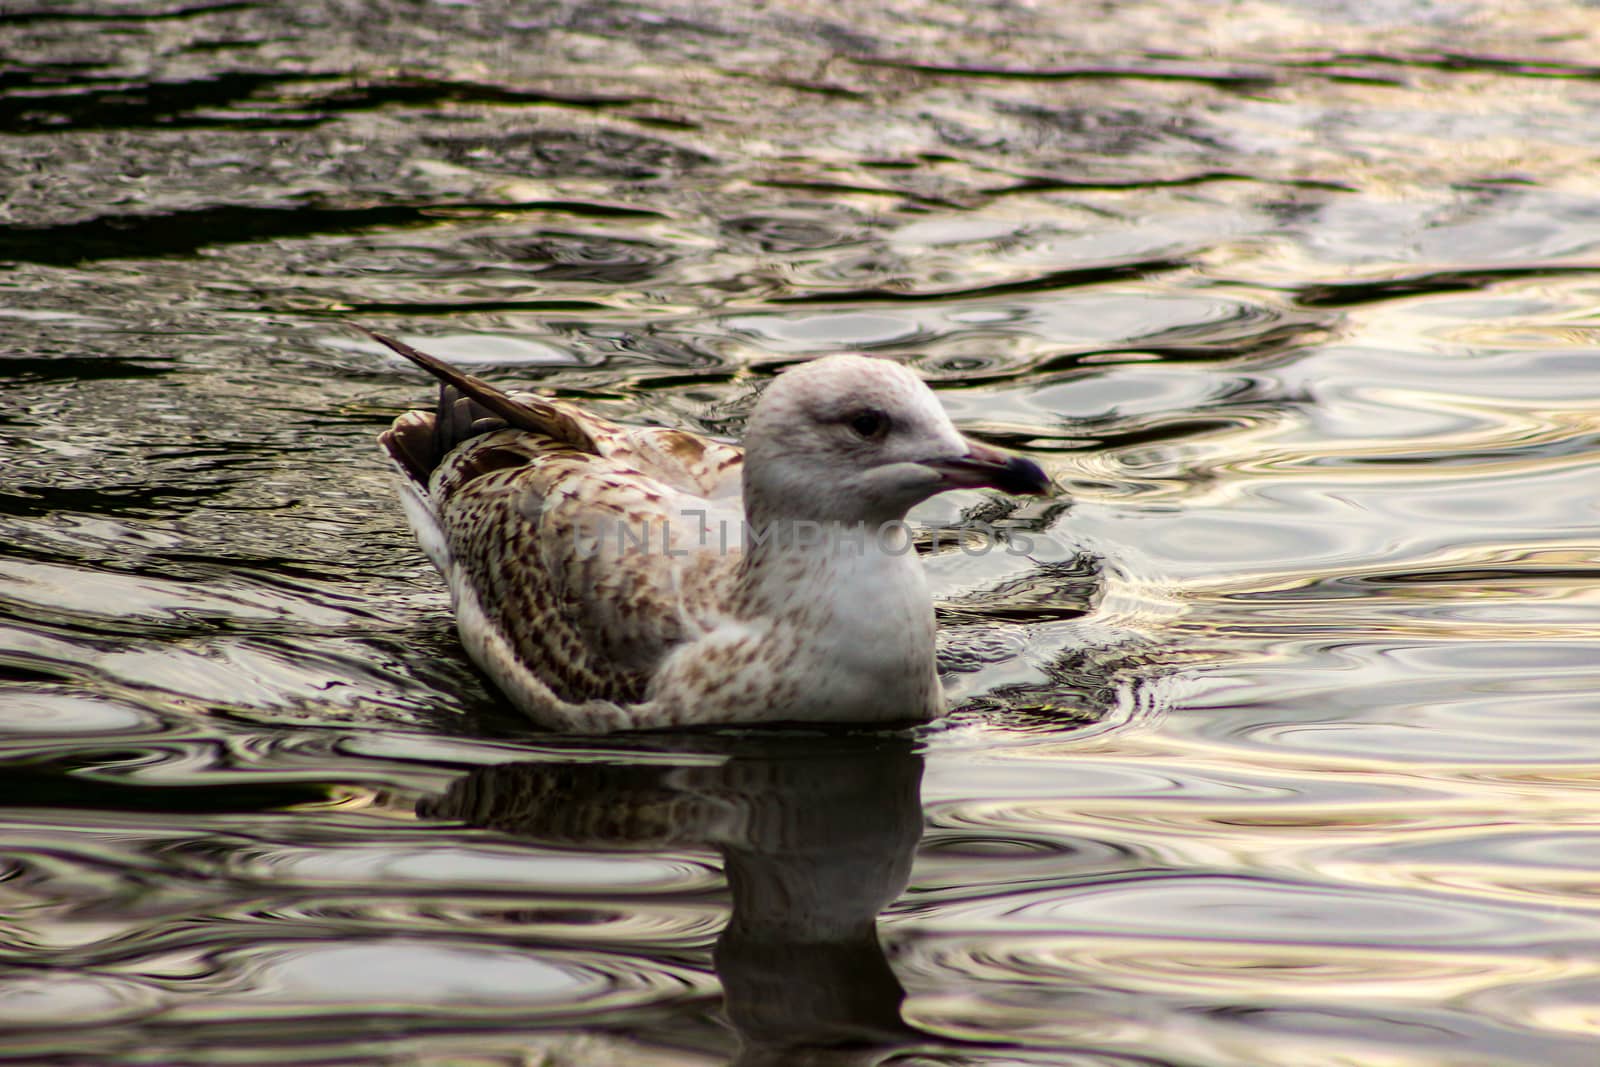 Seagull landing on the water close up shot, soft focus, reflection on water. by mynewturtle1